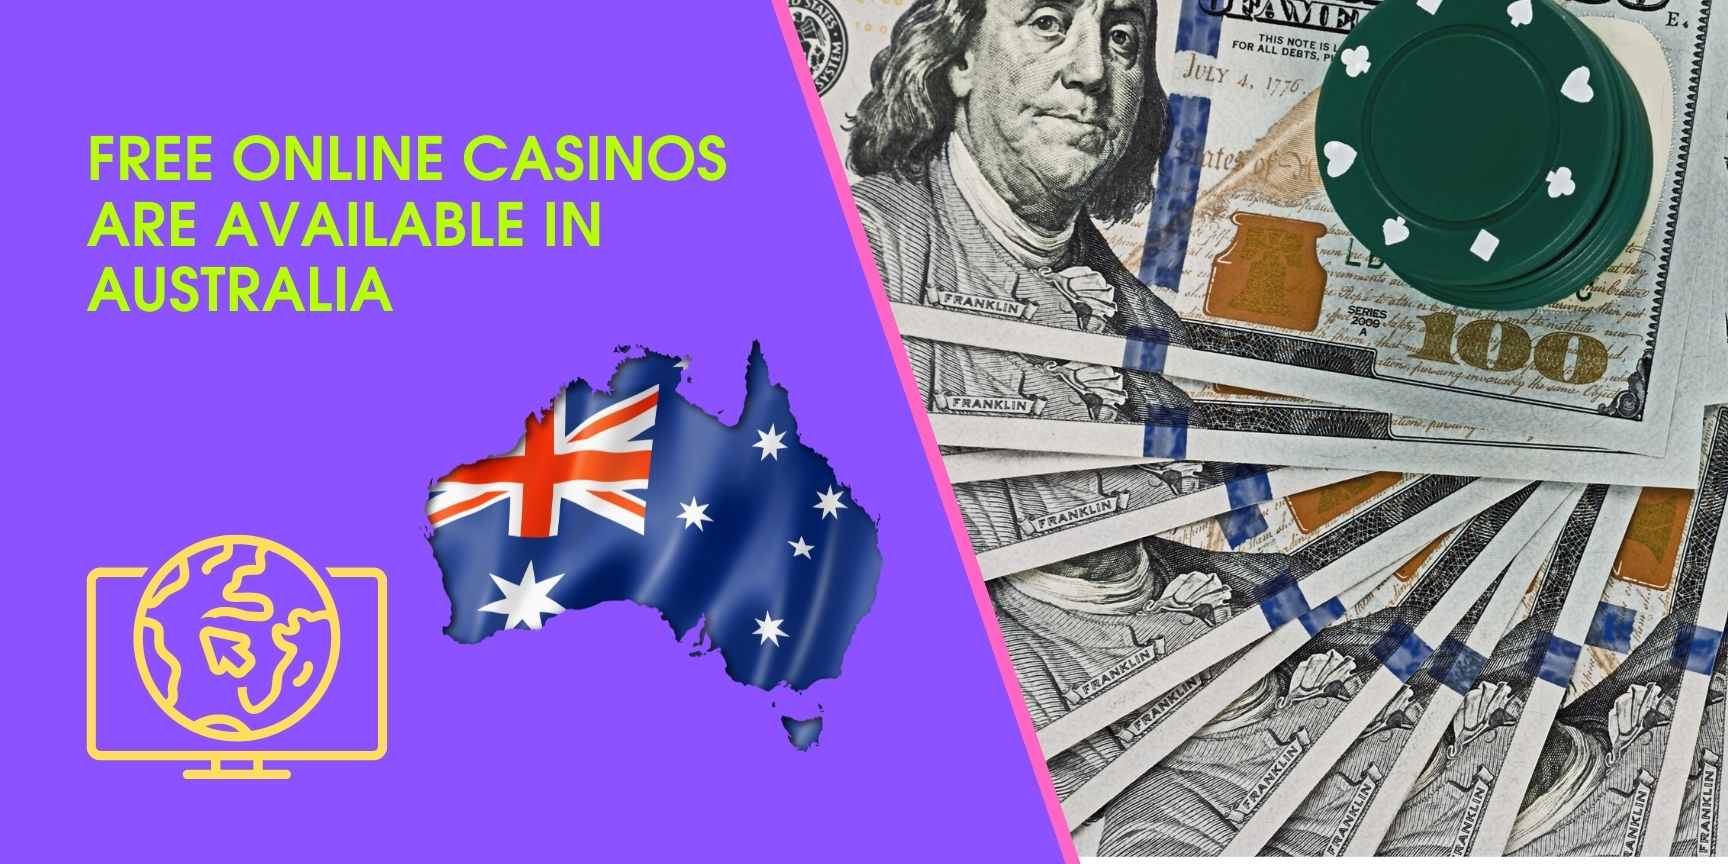 Free online casinos available in Australia